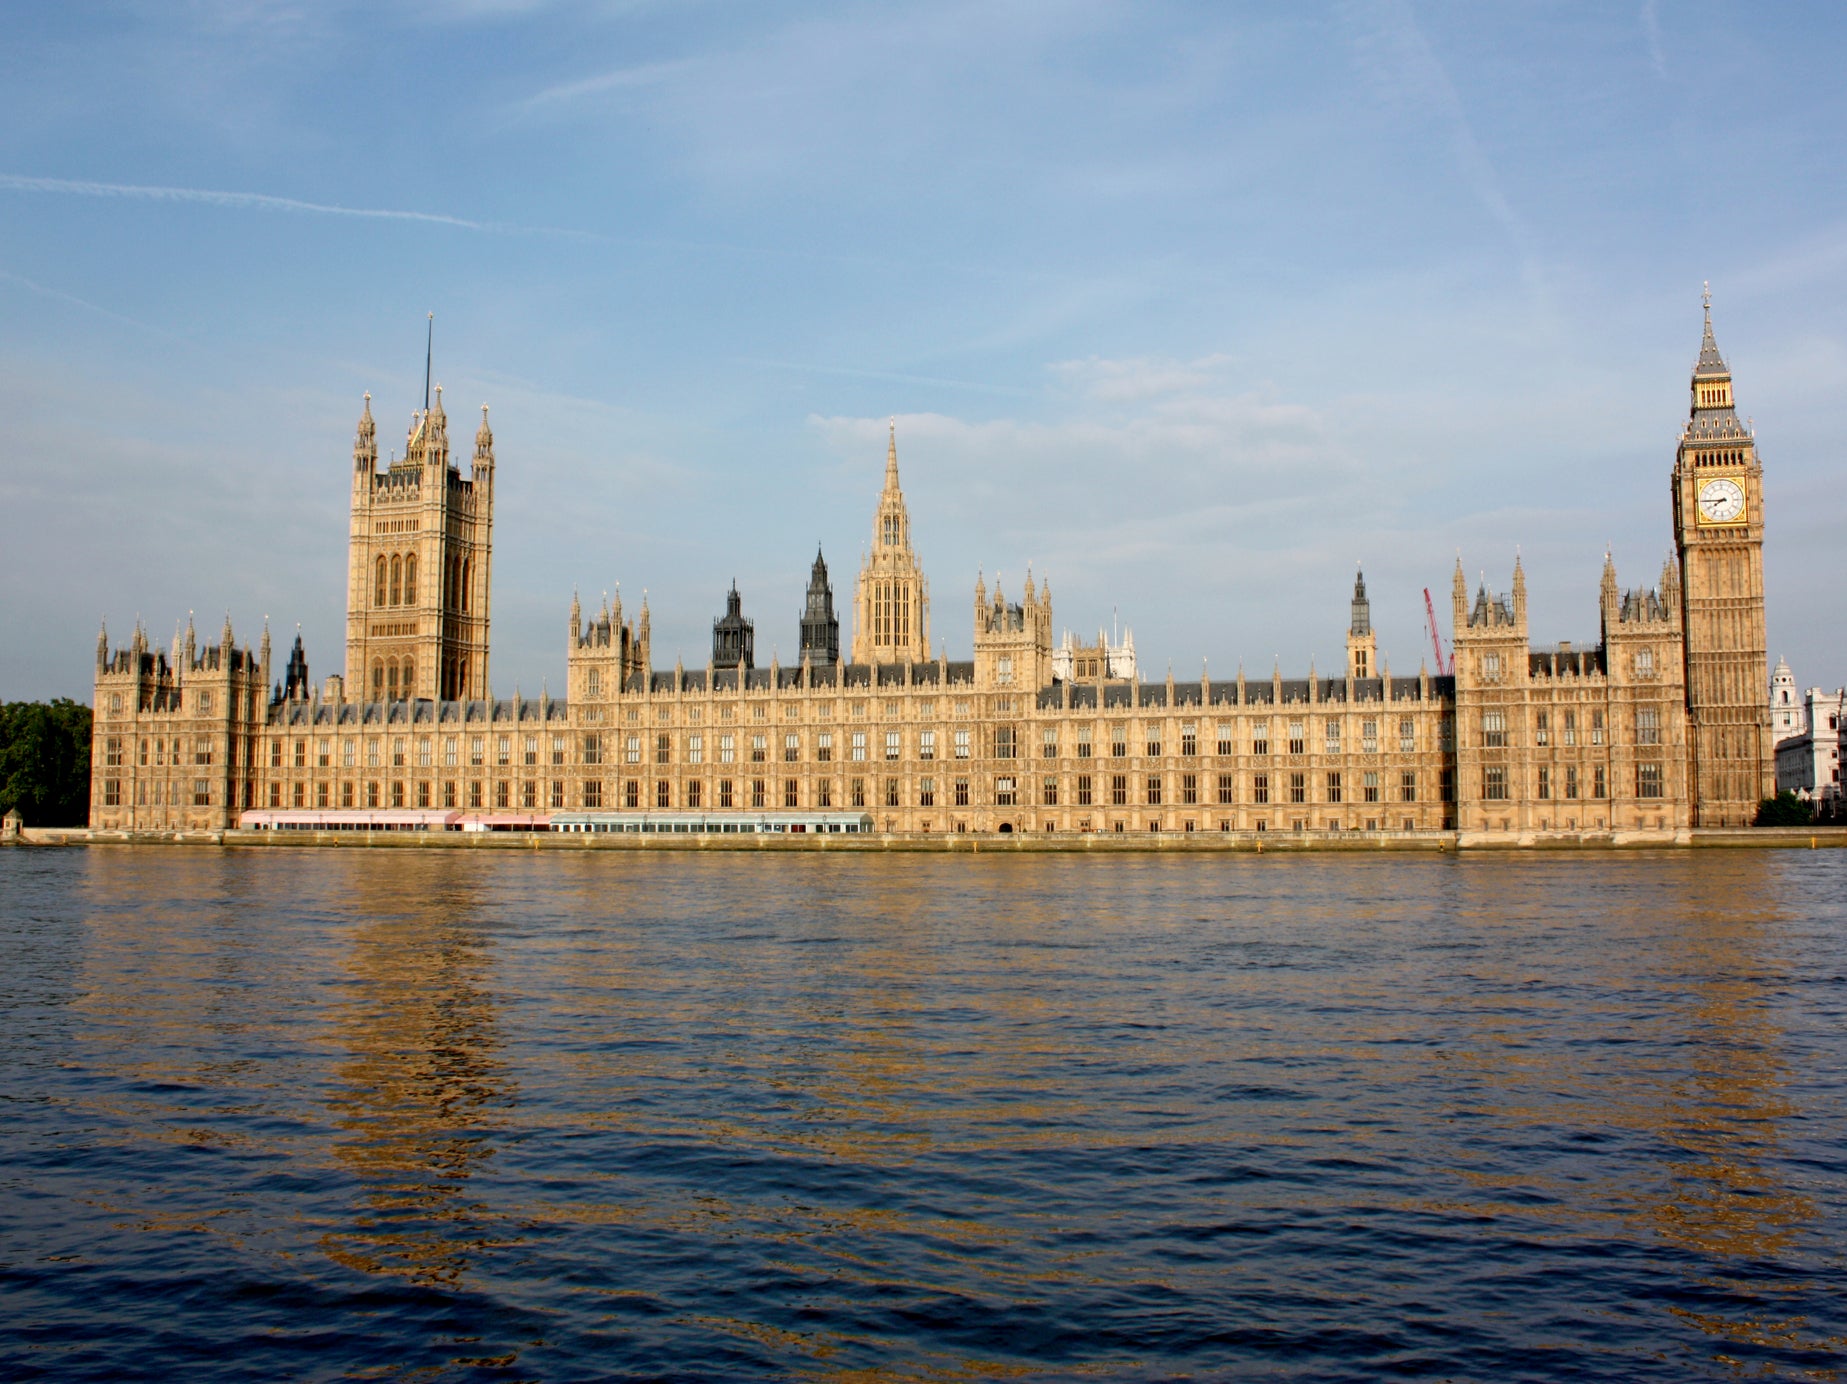 Hydroelectric turbines in the Thames could help power the Palace of Westminster, according to plans under consideration